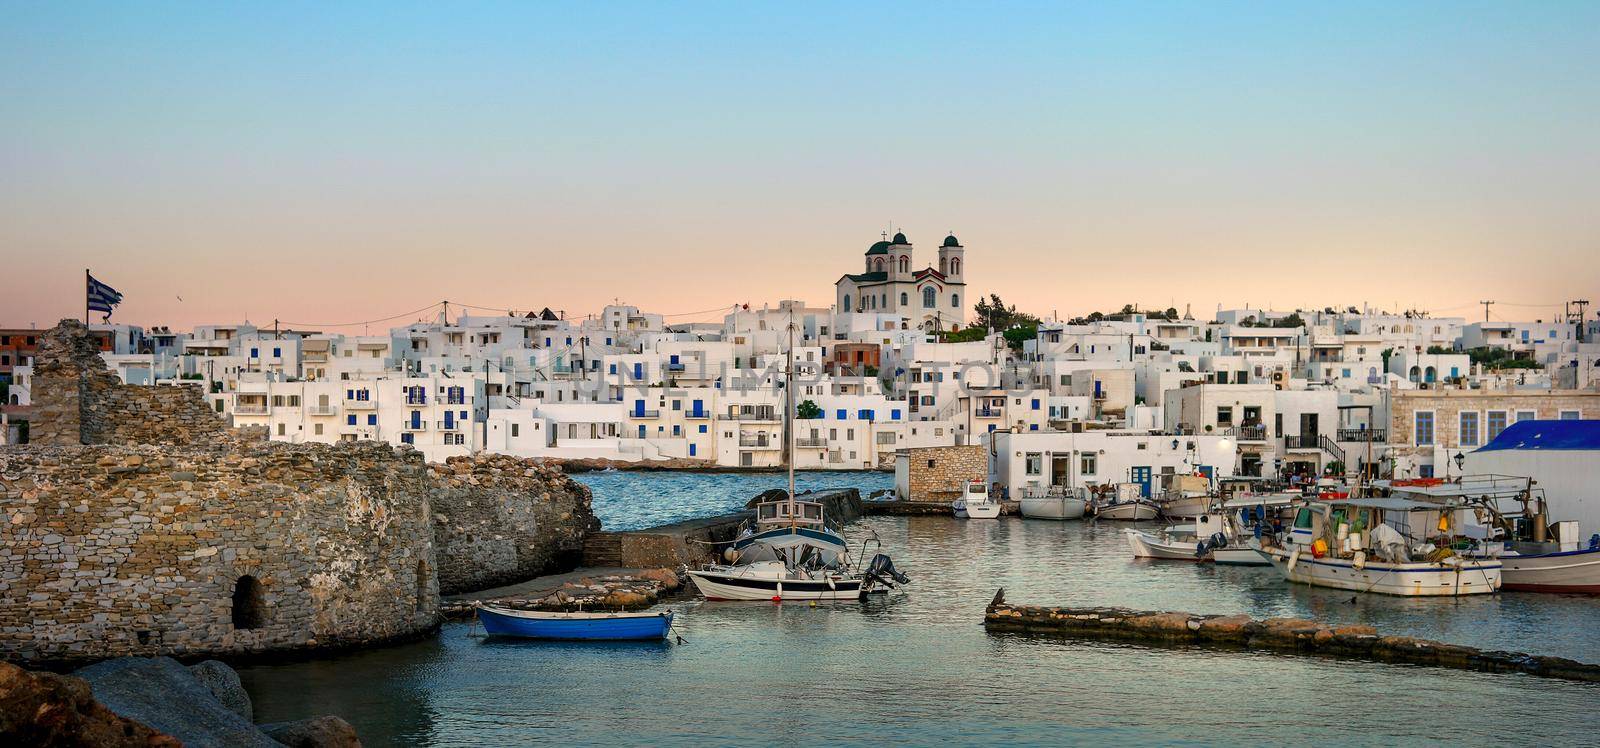 old port in Paros at sunset. Greece by tan4ikk1